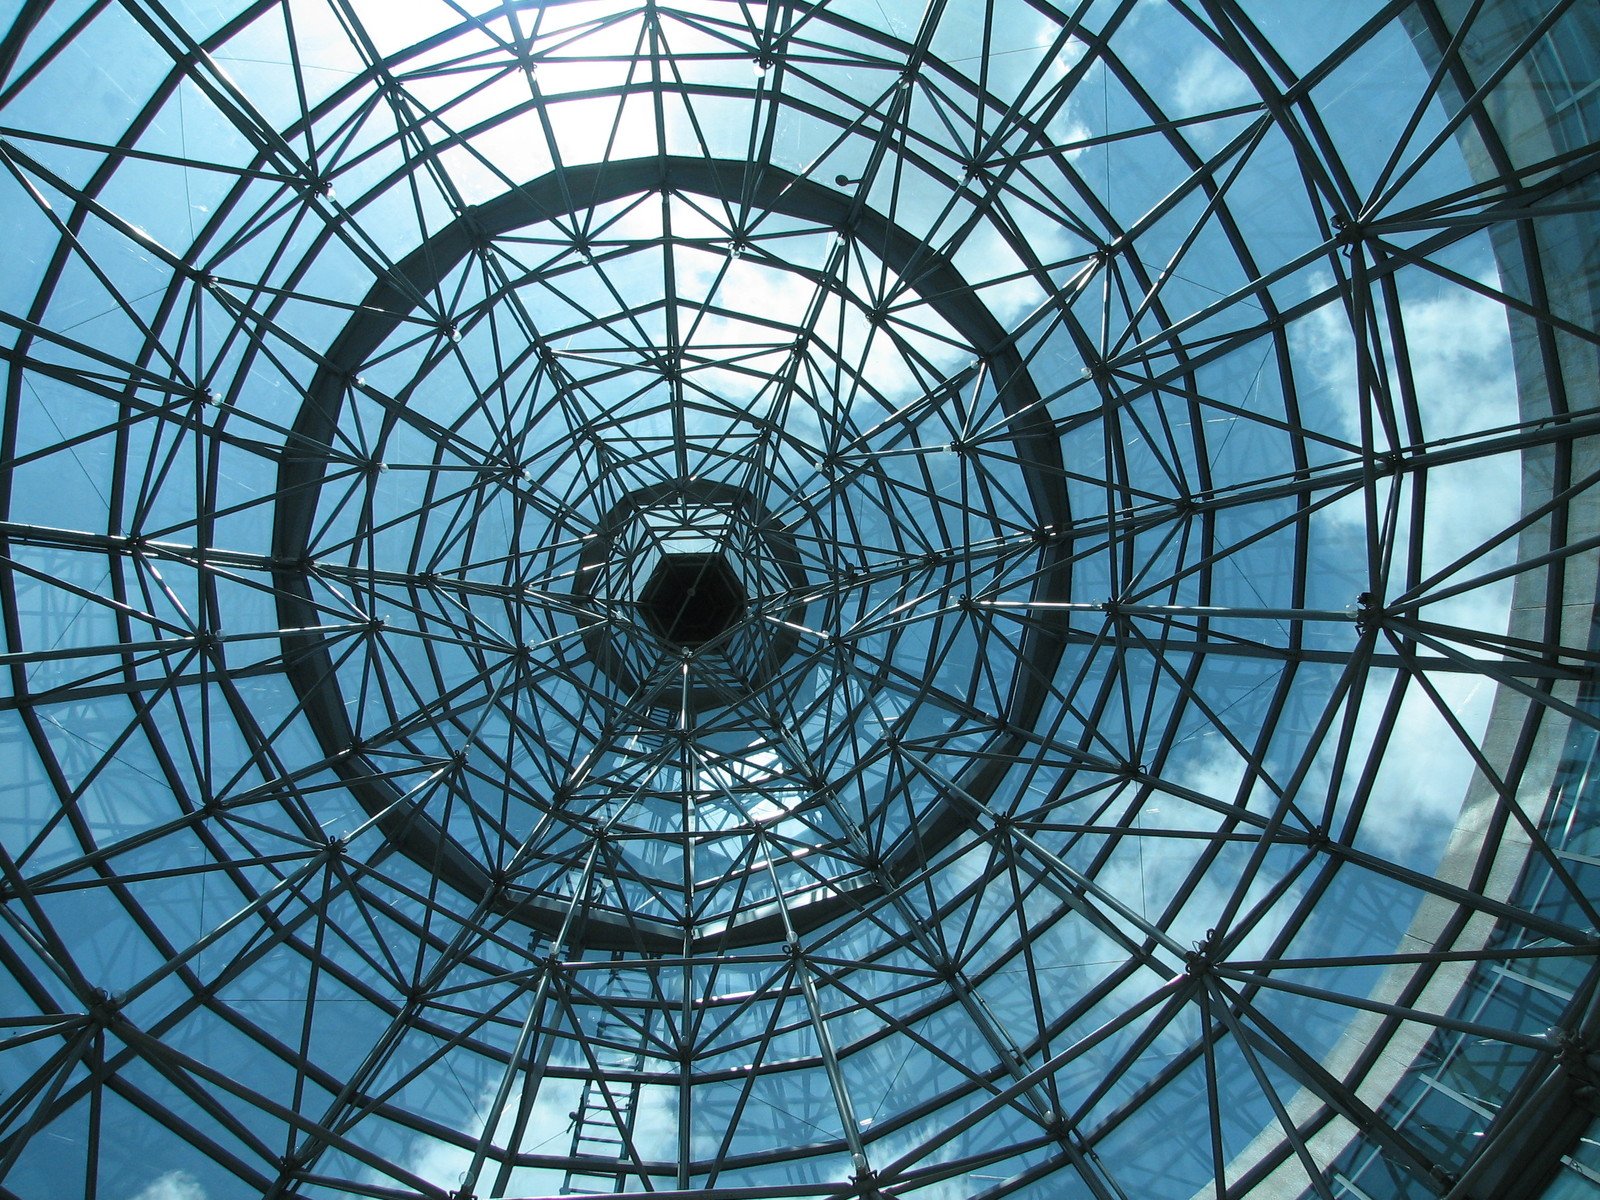 an overhead view of the glass dome in a building